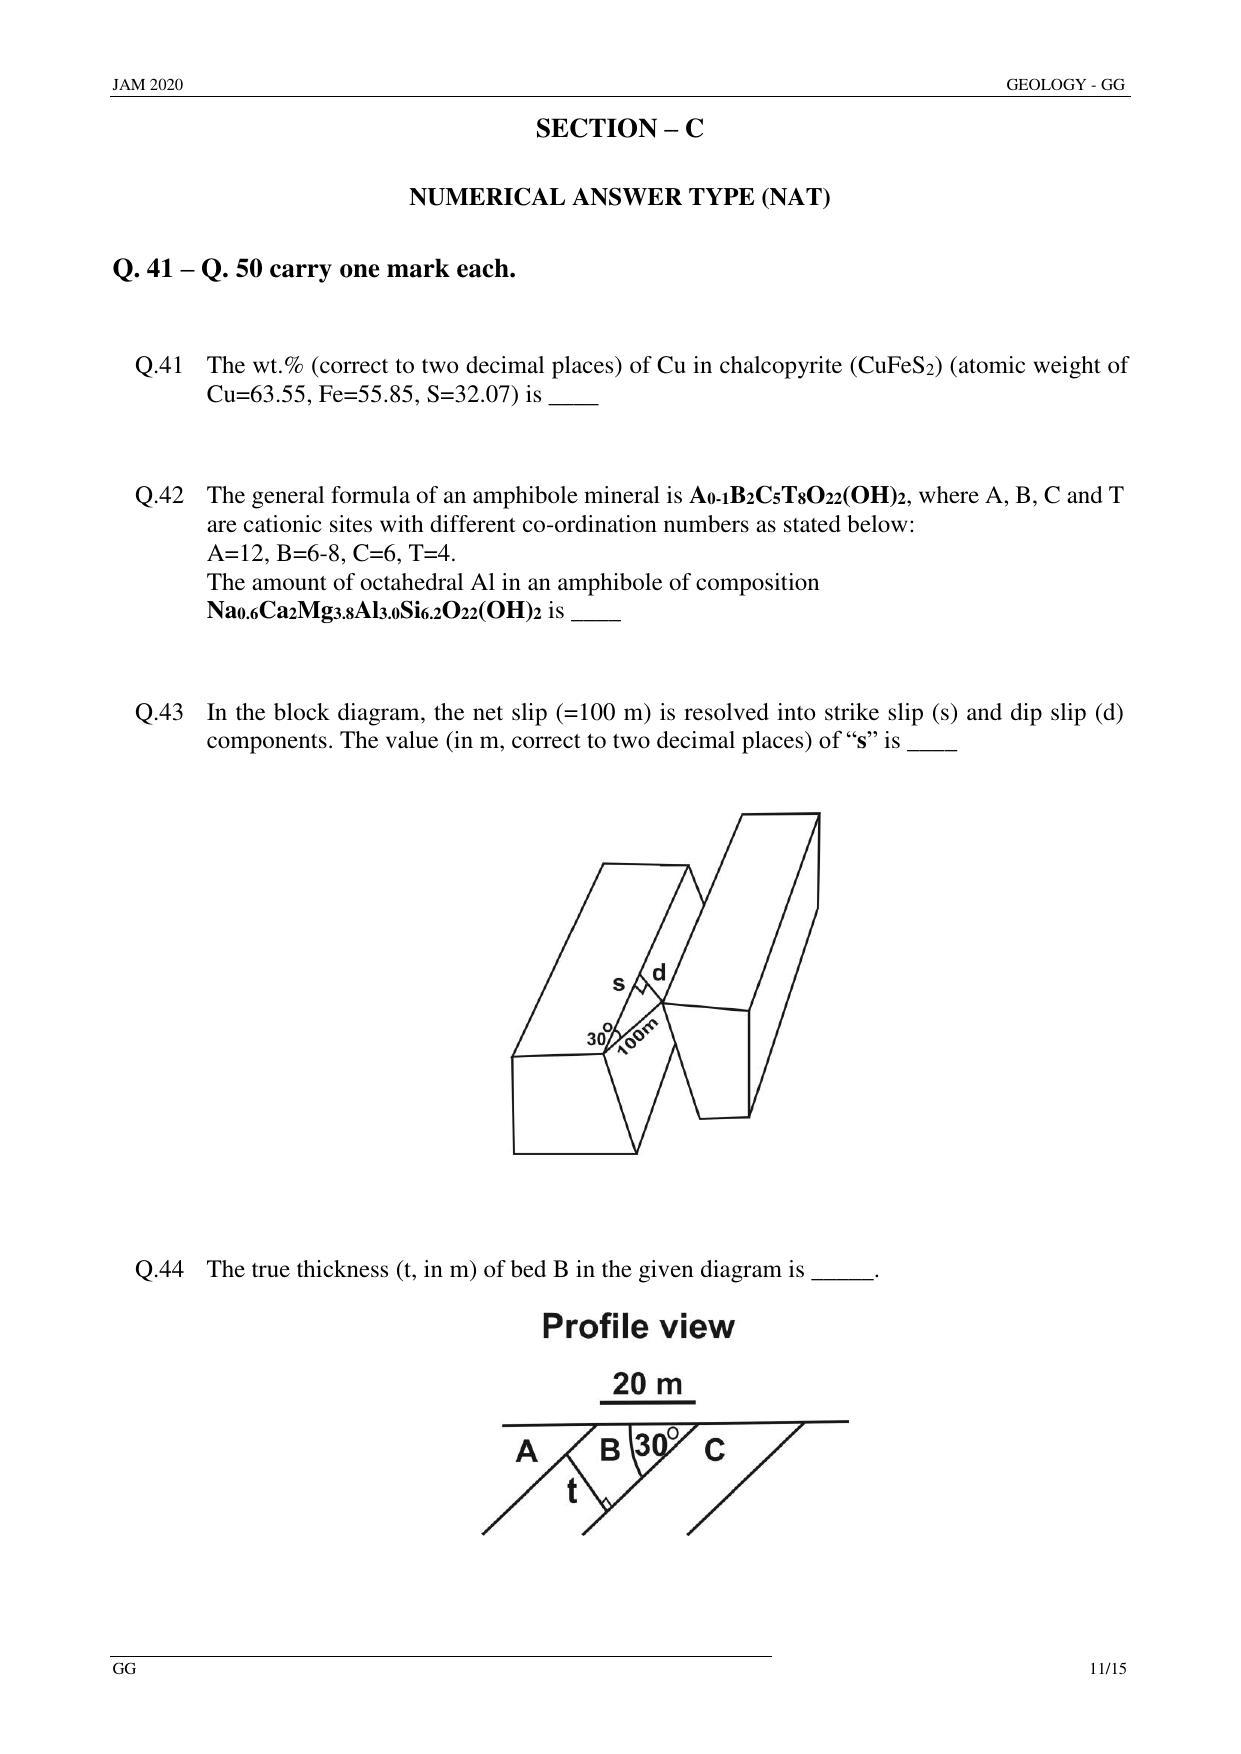 JAM 2020: GG Question Paper - Page 11